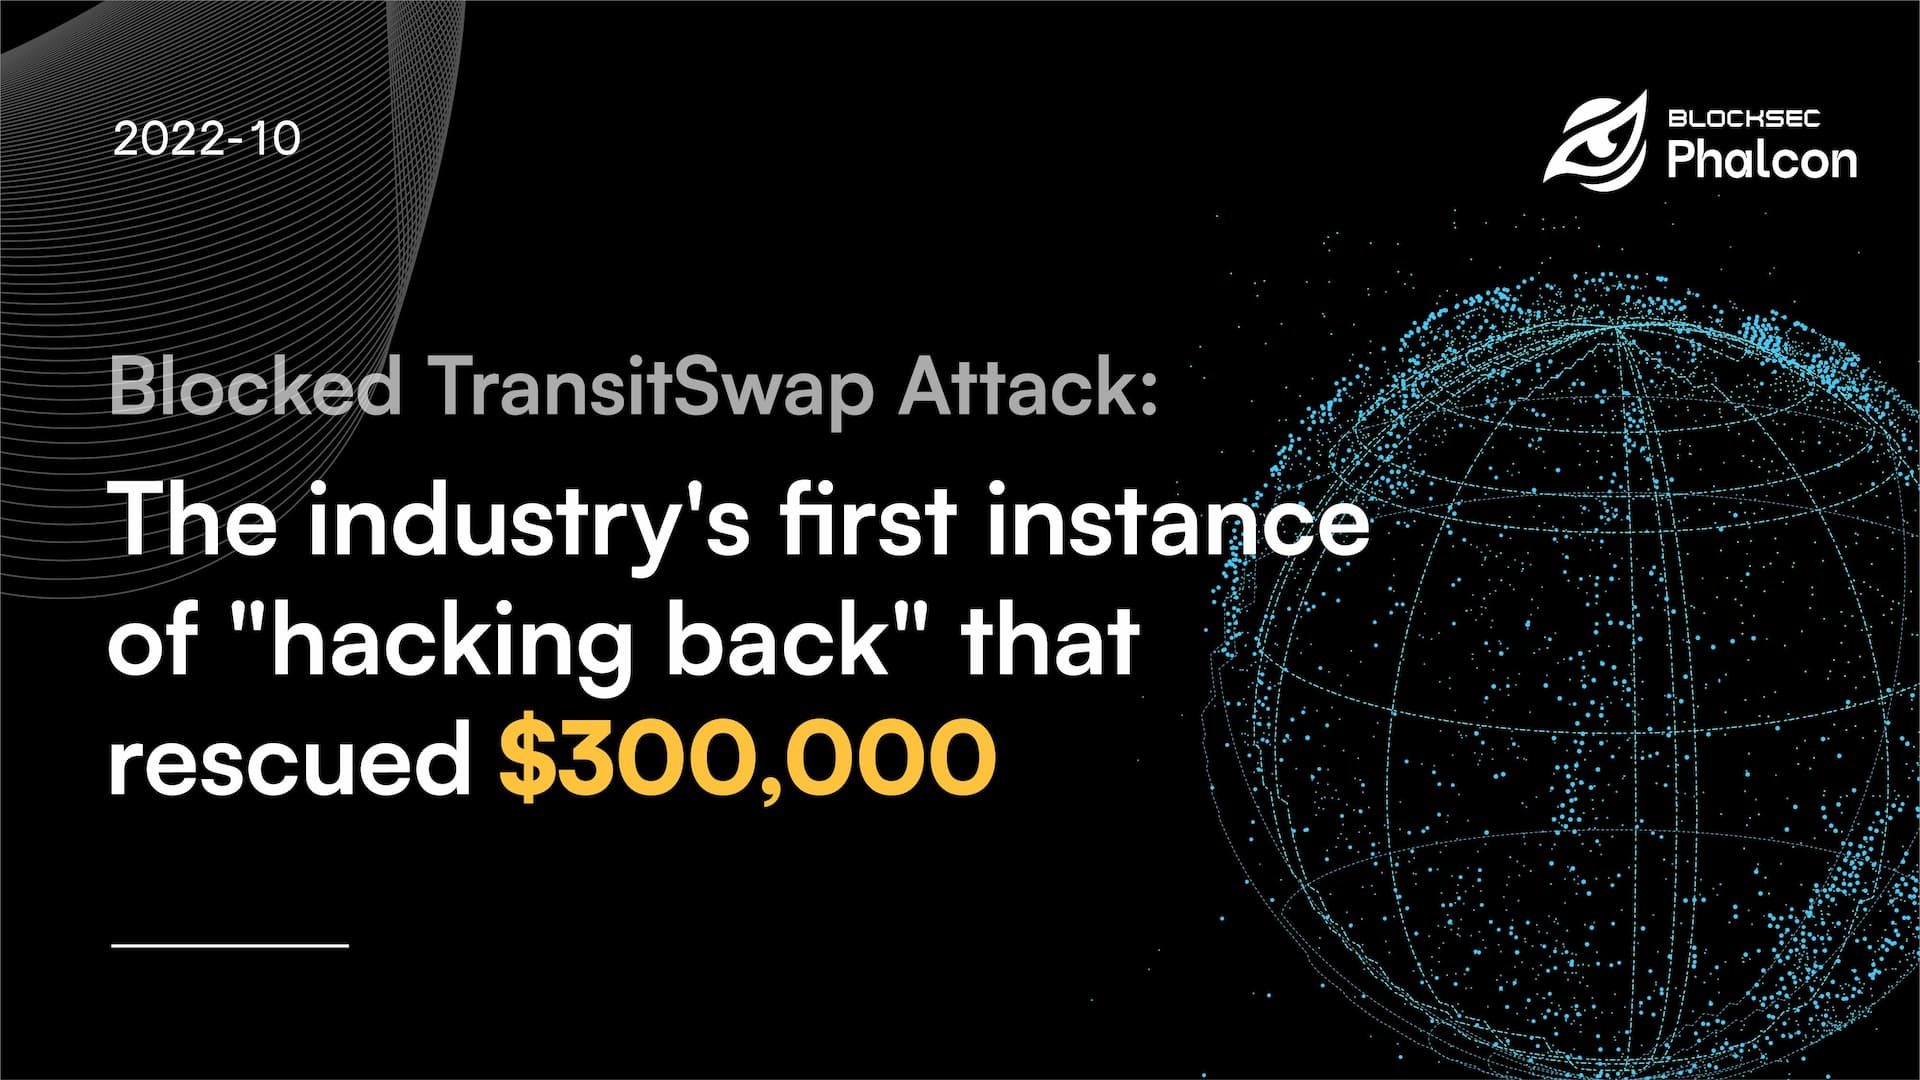 #4 Blocked TransitSwap Attack: Industry's First "Hacking Back" to Rescue $300,000